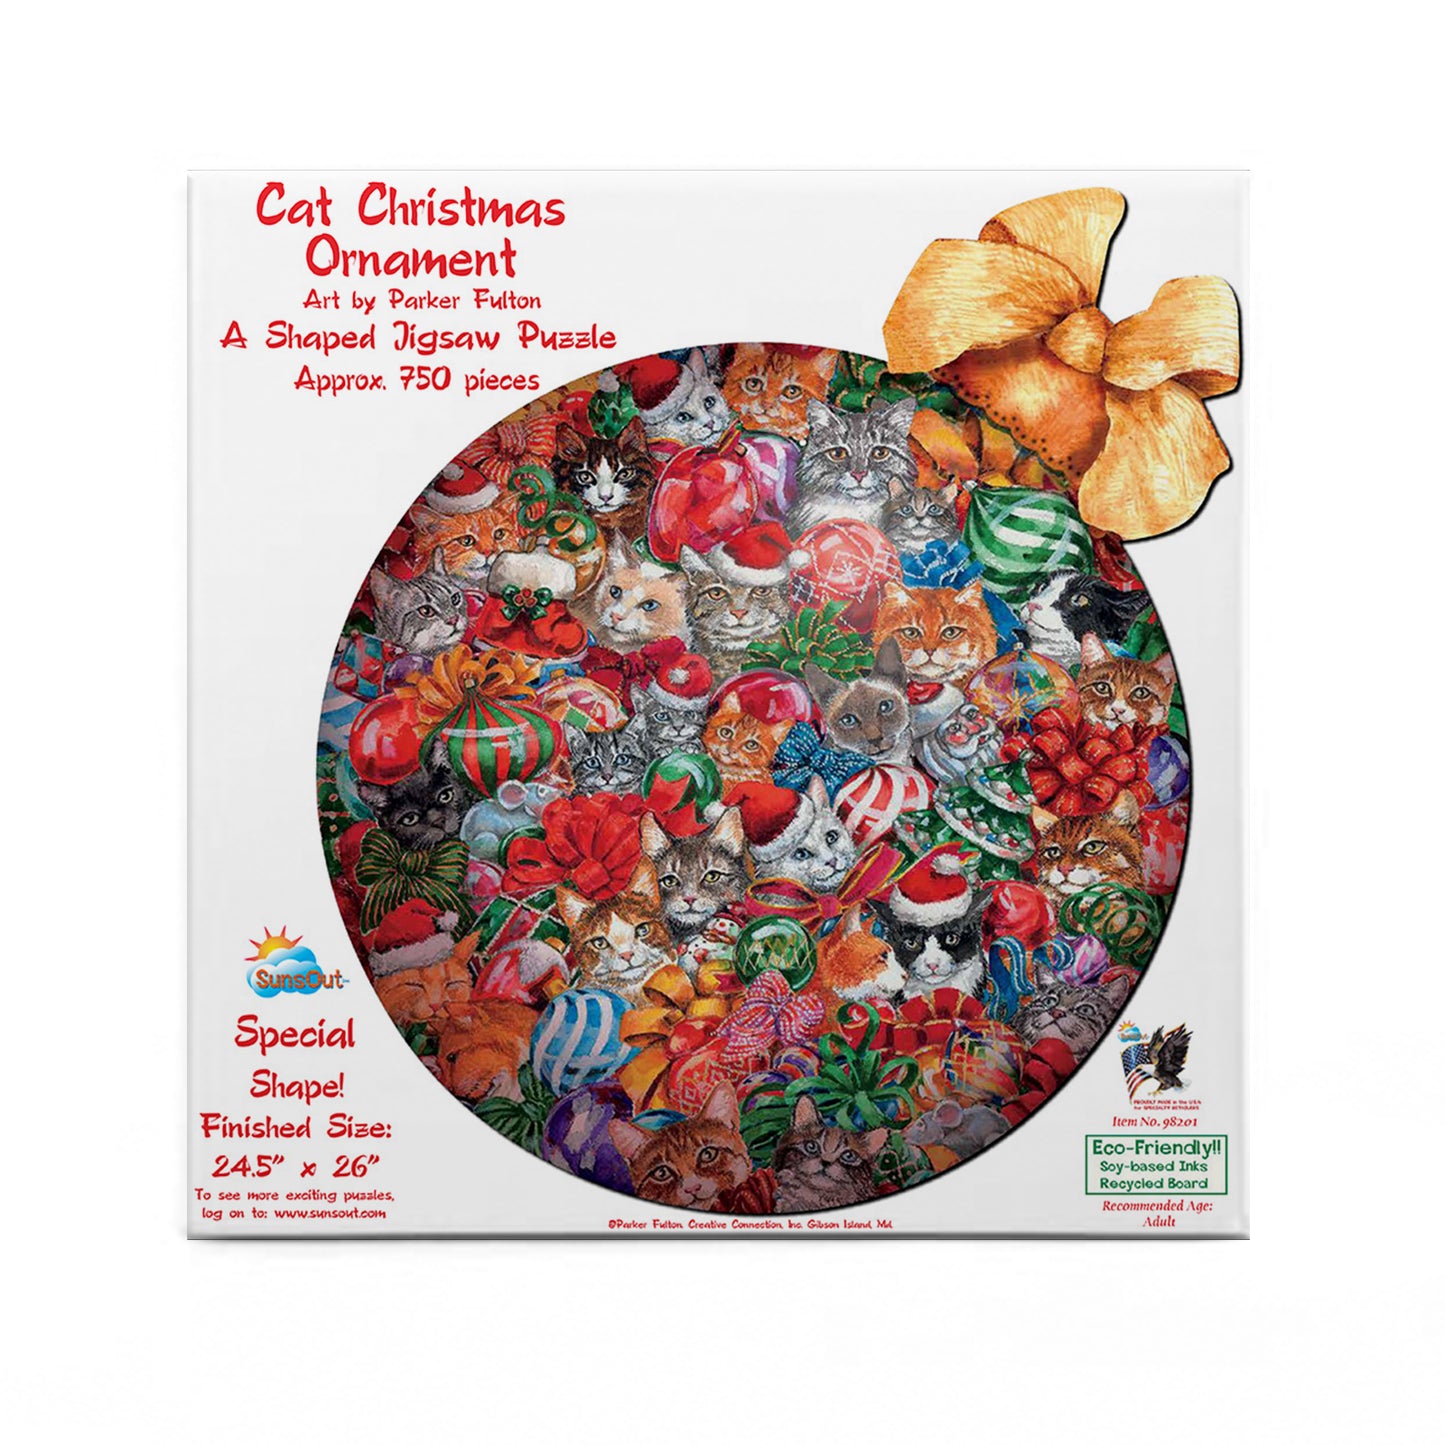 Cat Christmas ornament - Shaped 750 Piece Jigsaw Puzzle